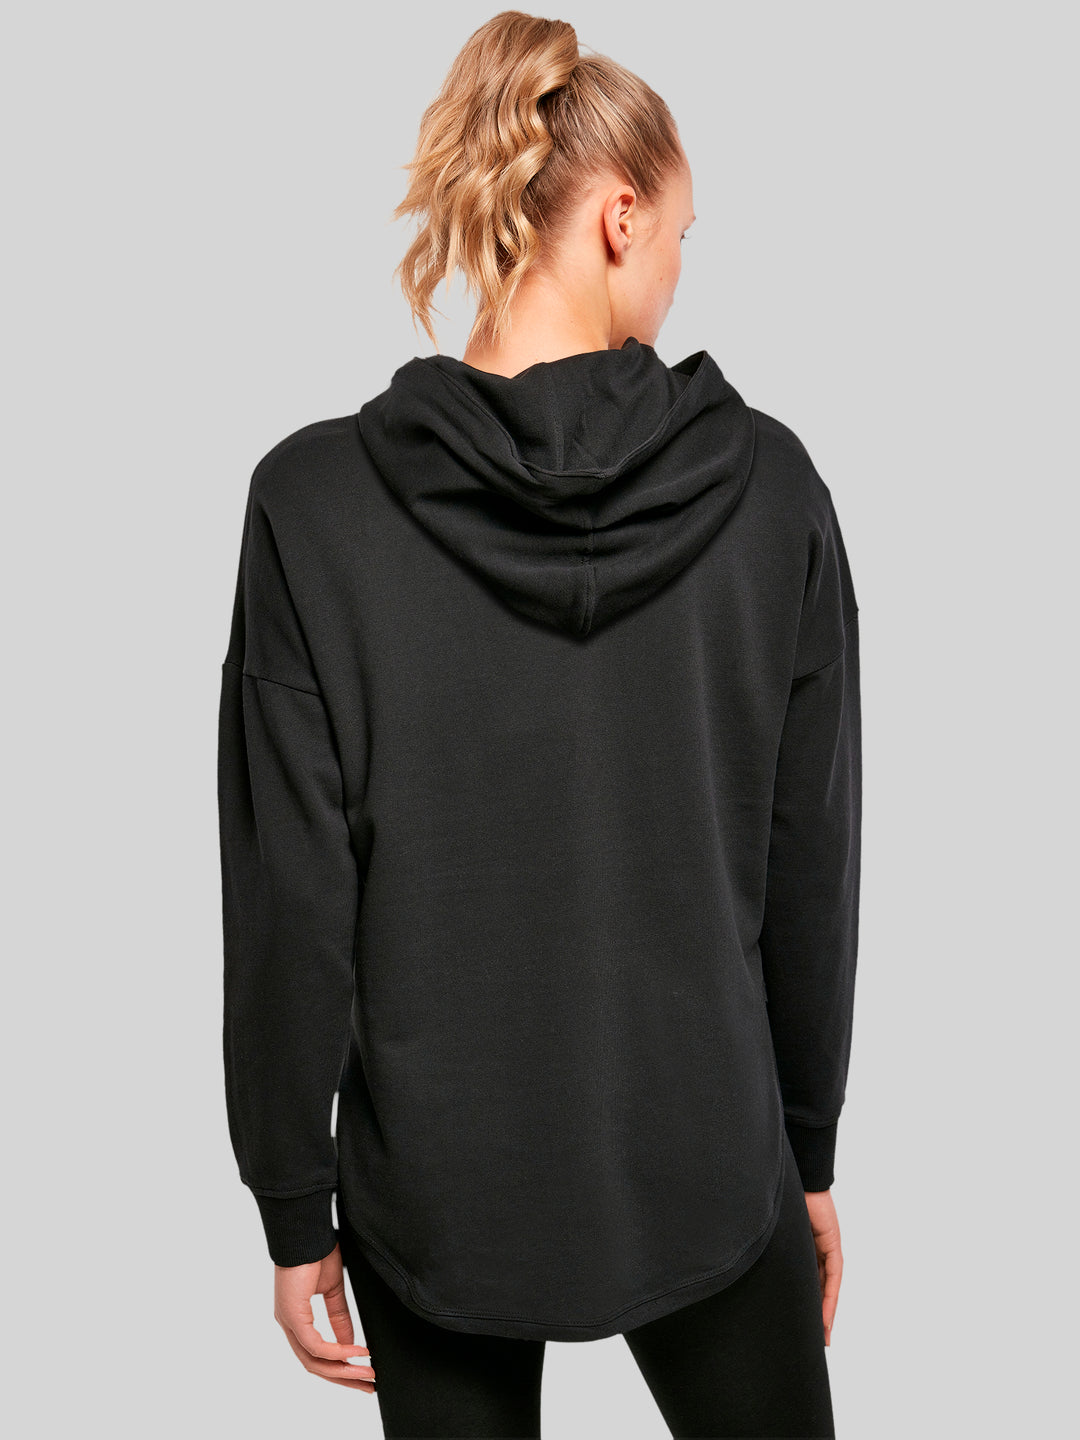 AC/DC Back in Black Ladies Oversized Hoodie - Bask in Classic Rock Comfort and Style